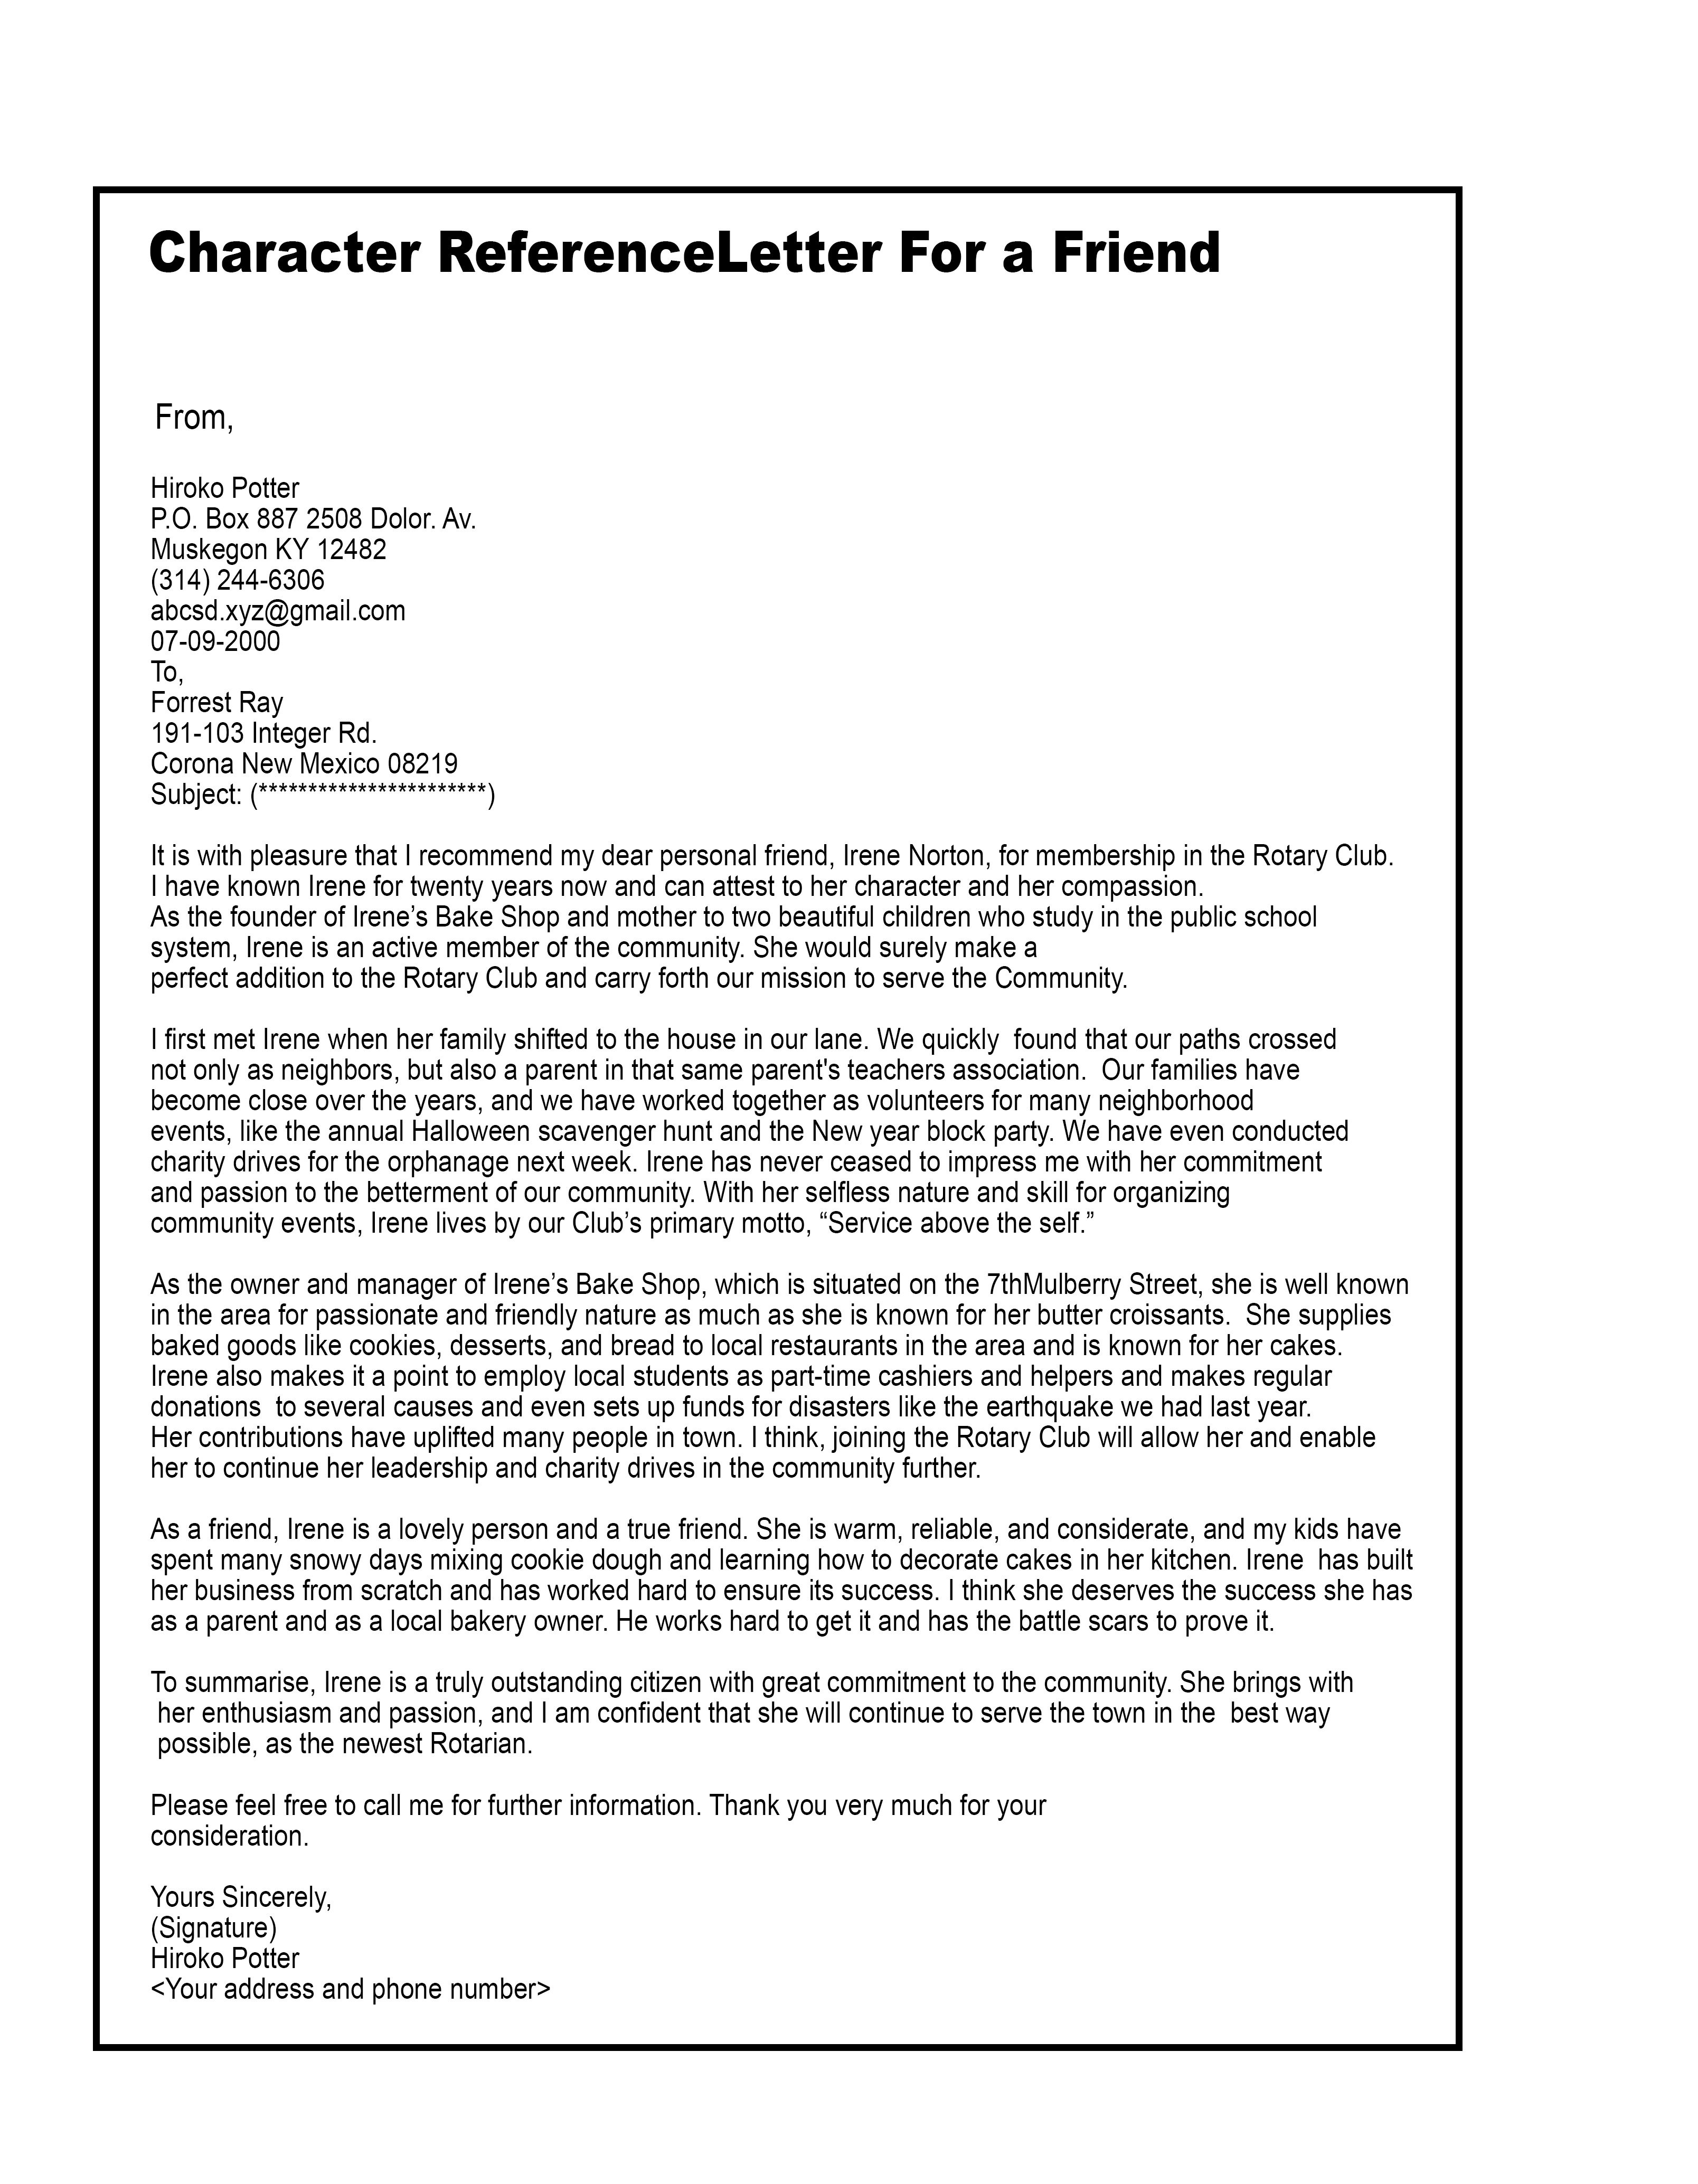 Character Reference Letter For a Friend-min